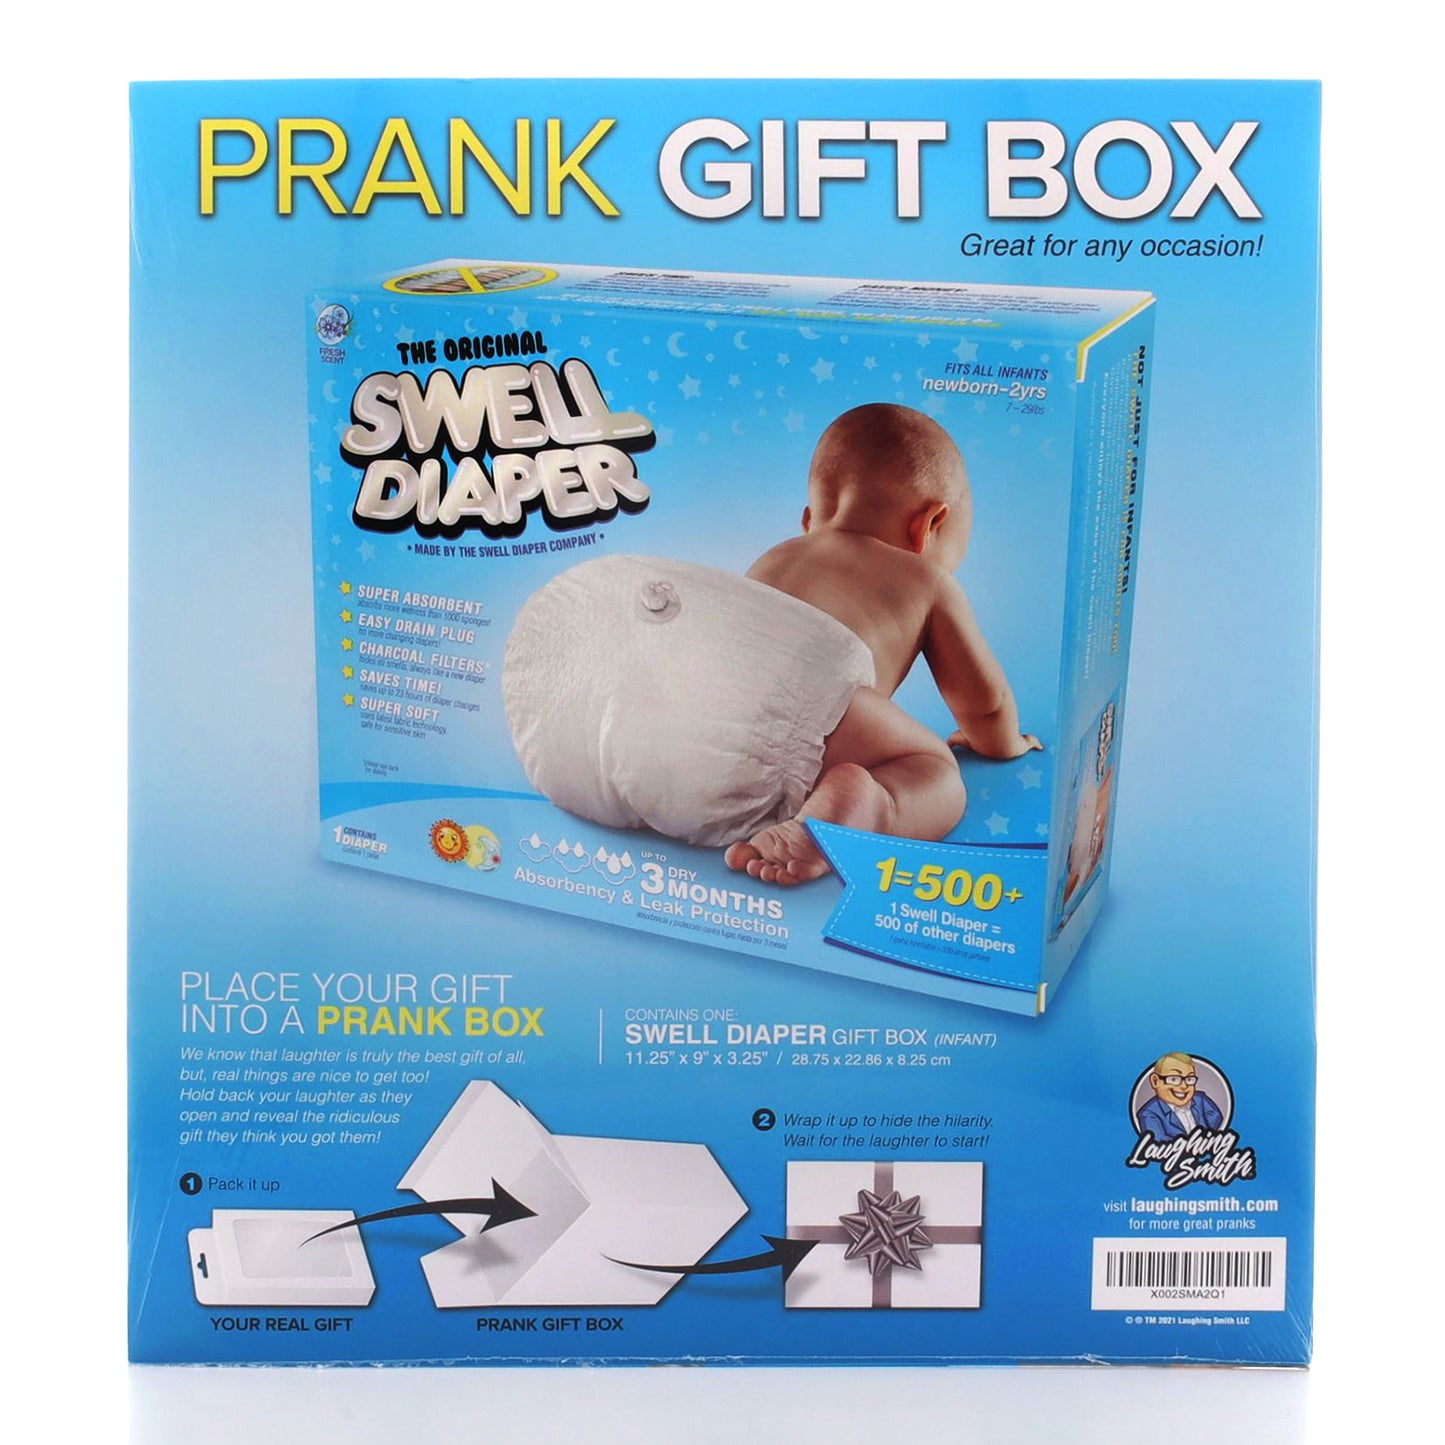 Swell Baby Diaper – Prank Gift Box – Gag Gift Boxes for First Time Parents Presents & Funny Hilarious Joke Gift Box to Wrap Your ‘Real Present